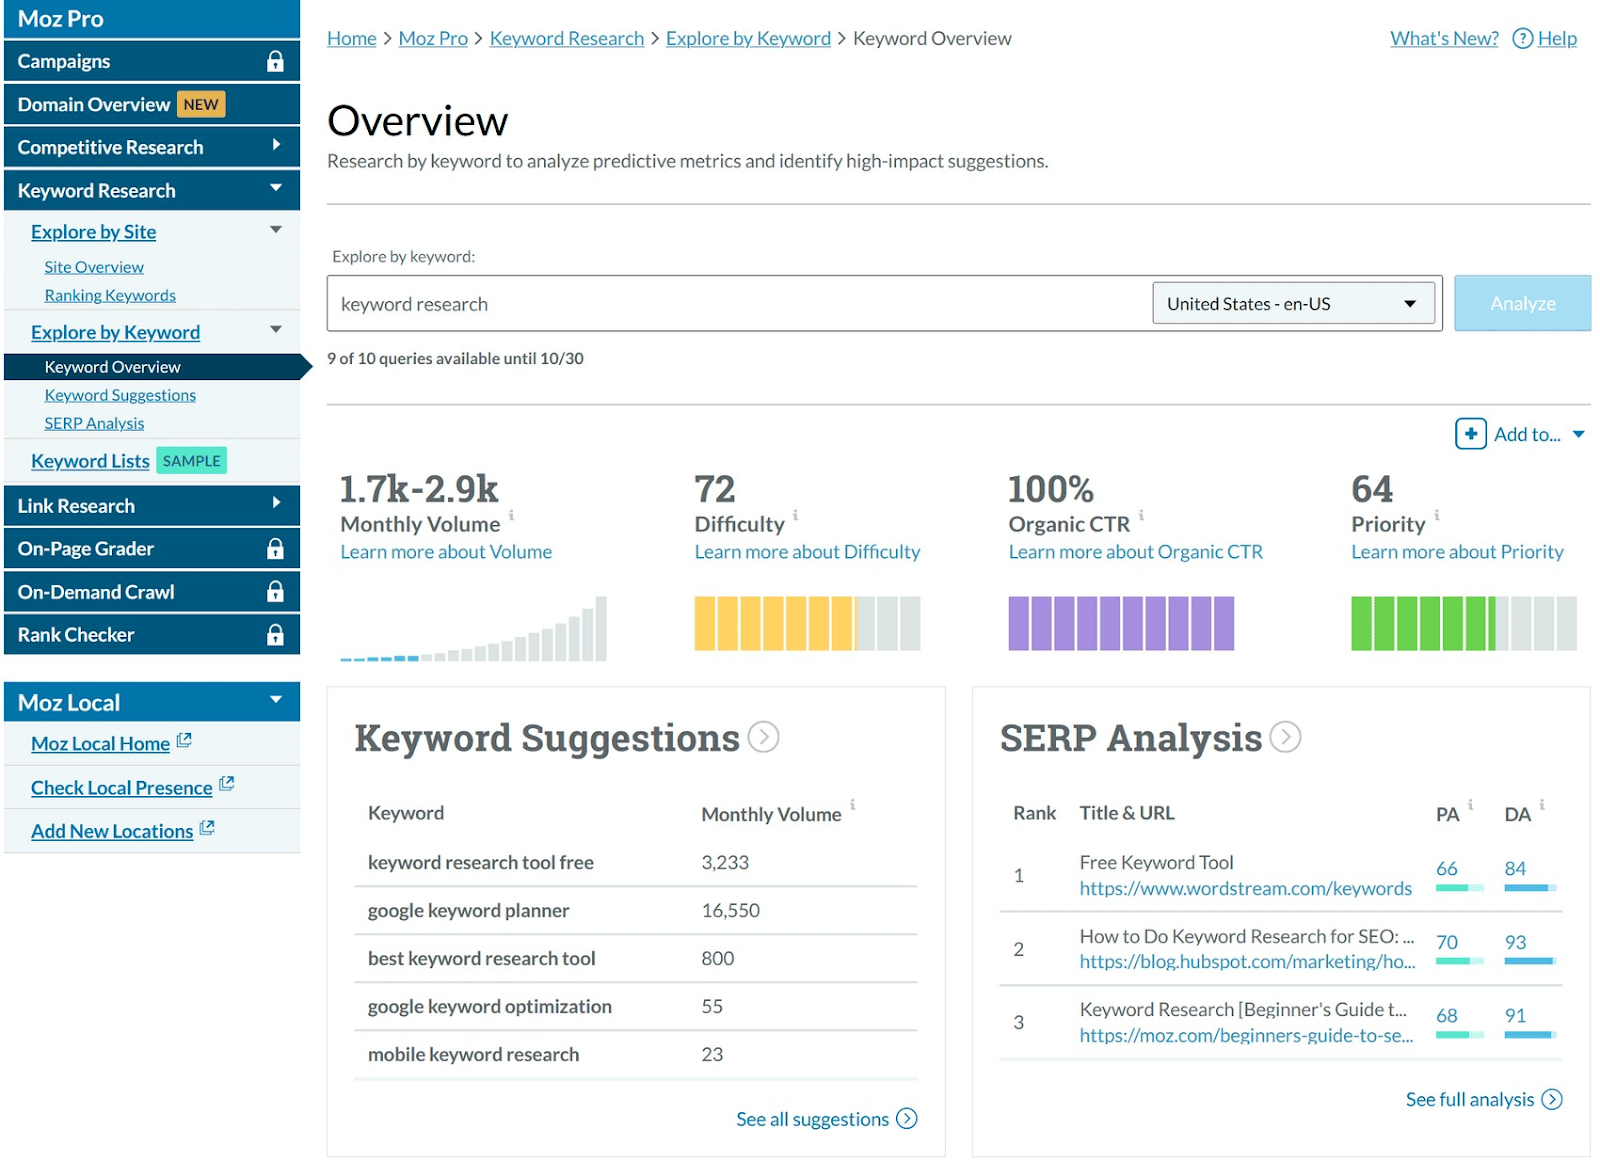 Moz Pro overview dashboard